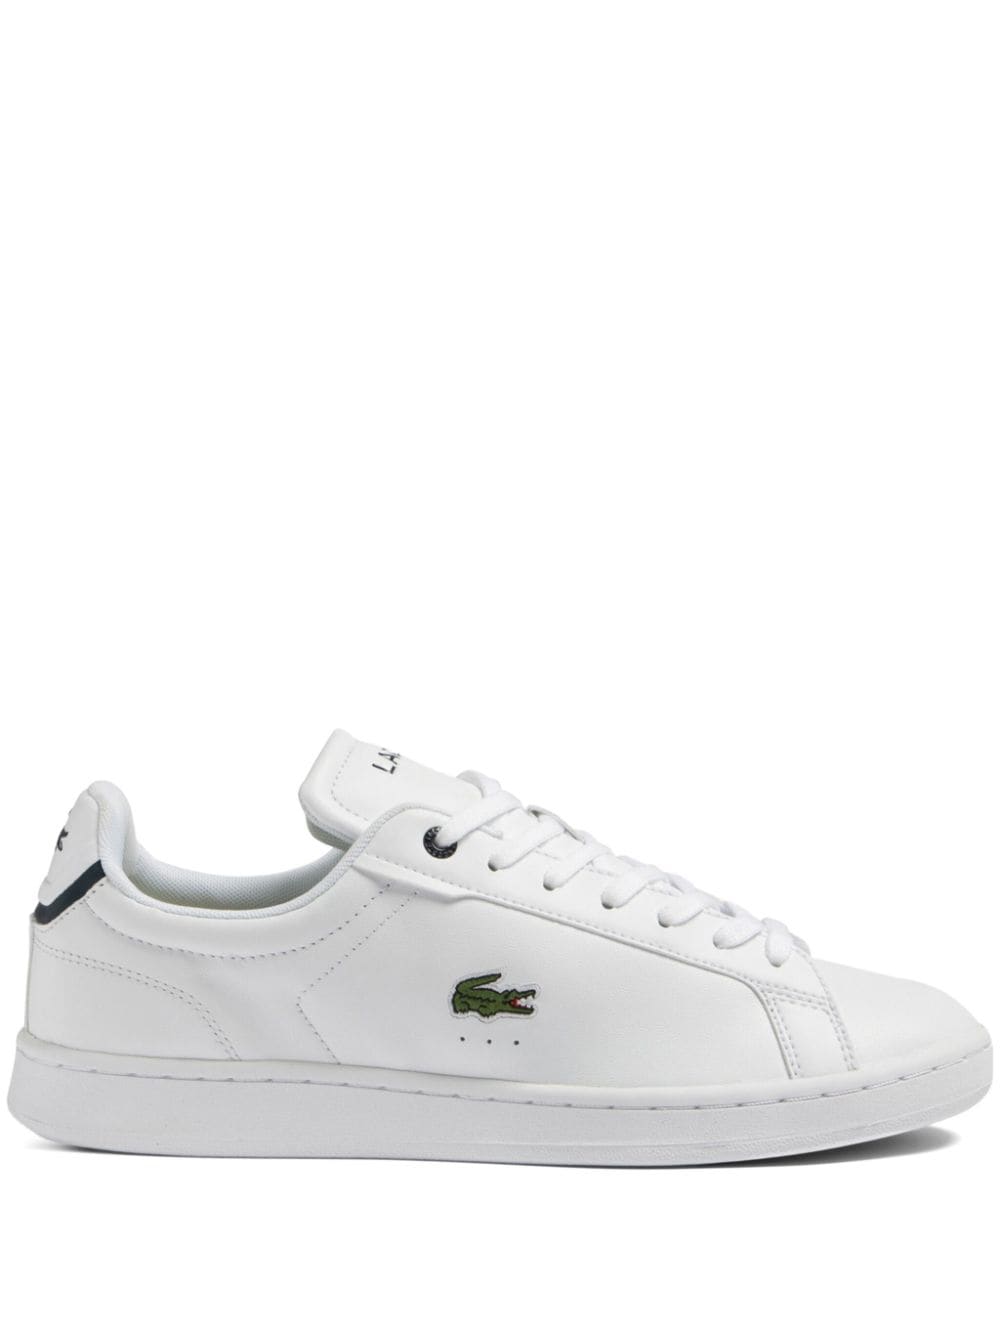 LACOSTE CARNABY PRO BL LEATHER SNEAKERS